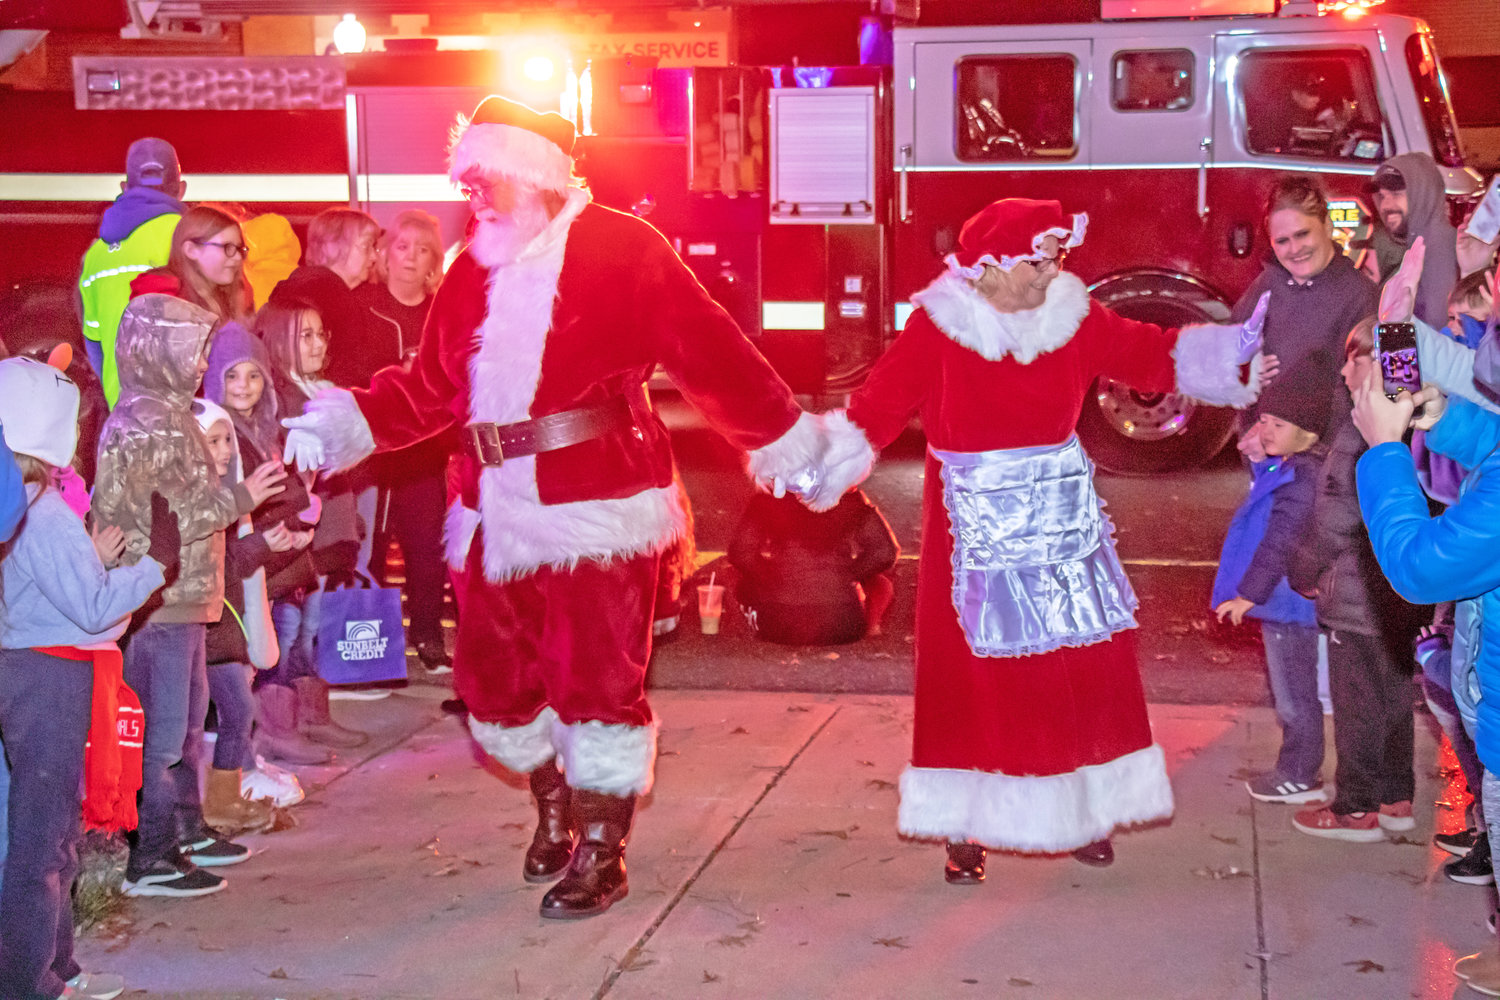 MR. AND MRS. CLAUS made their appearance in Clinton during last weekend's Christmas Parade. The night was cold, but the crowd was cheery!